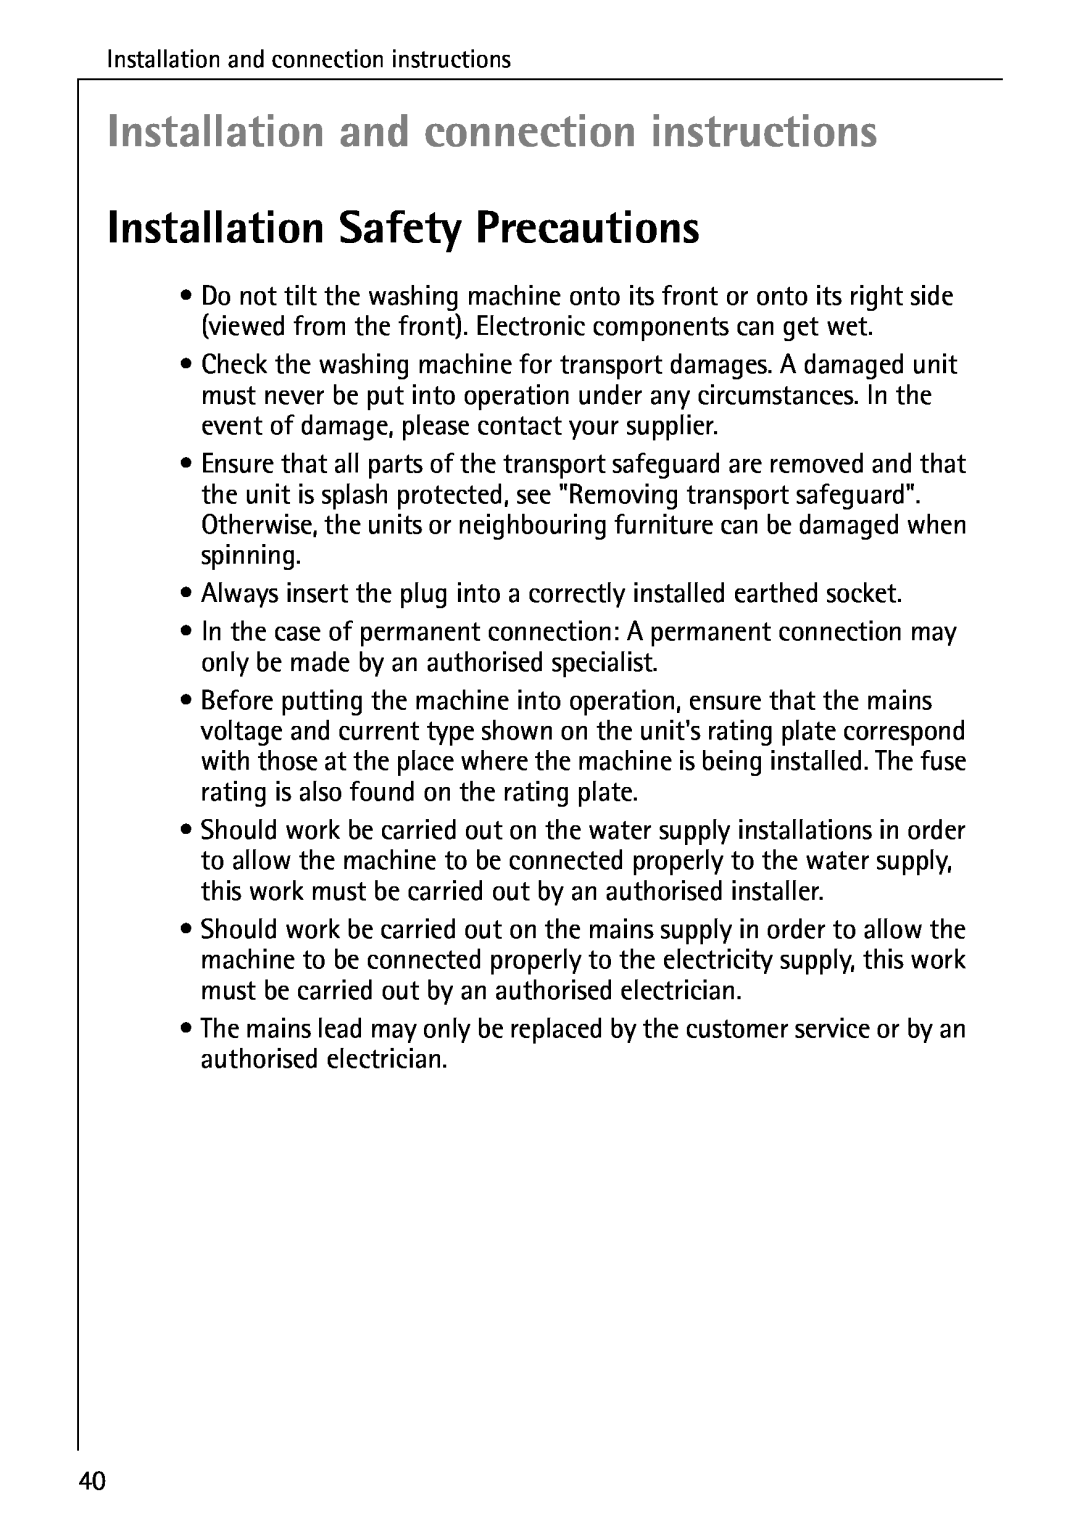 AEG 72640 manual Installation and connection instructions, Installation Safety Precautions 